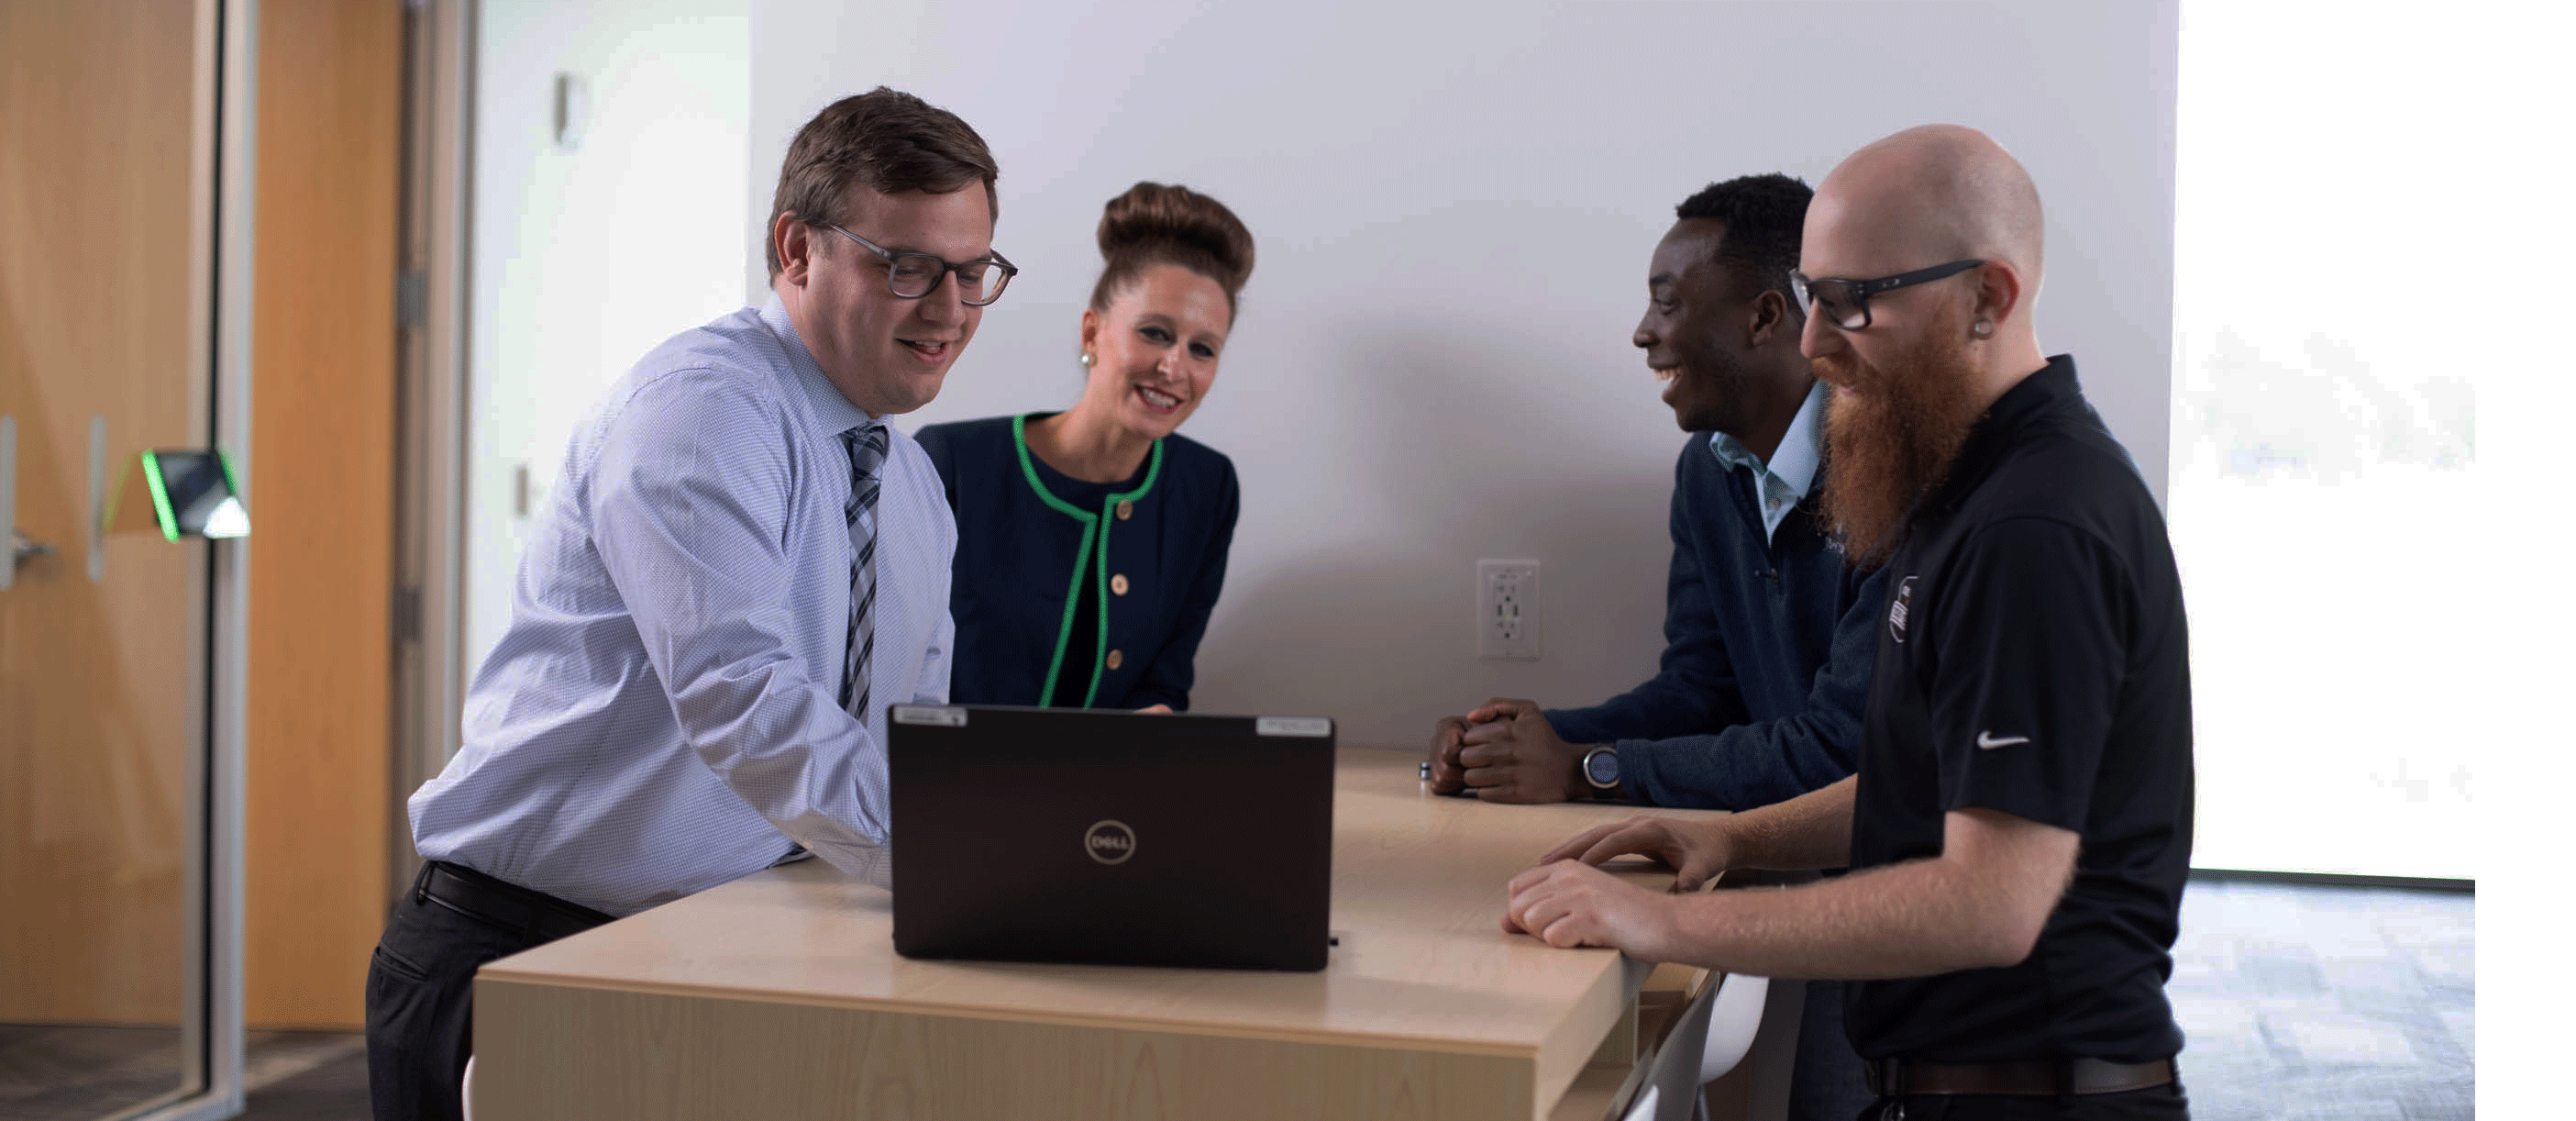 Three males and one female team members collaborating at a high top desk in an office with a laptop in front of them